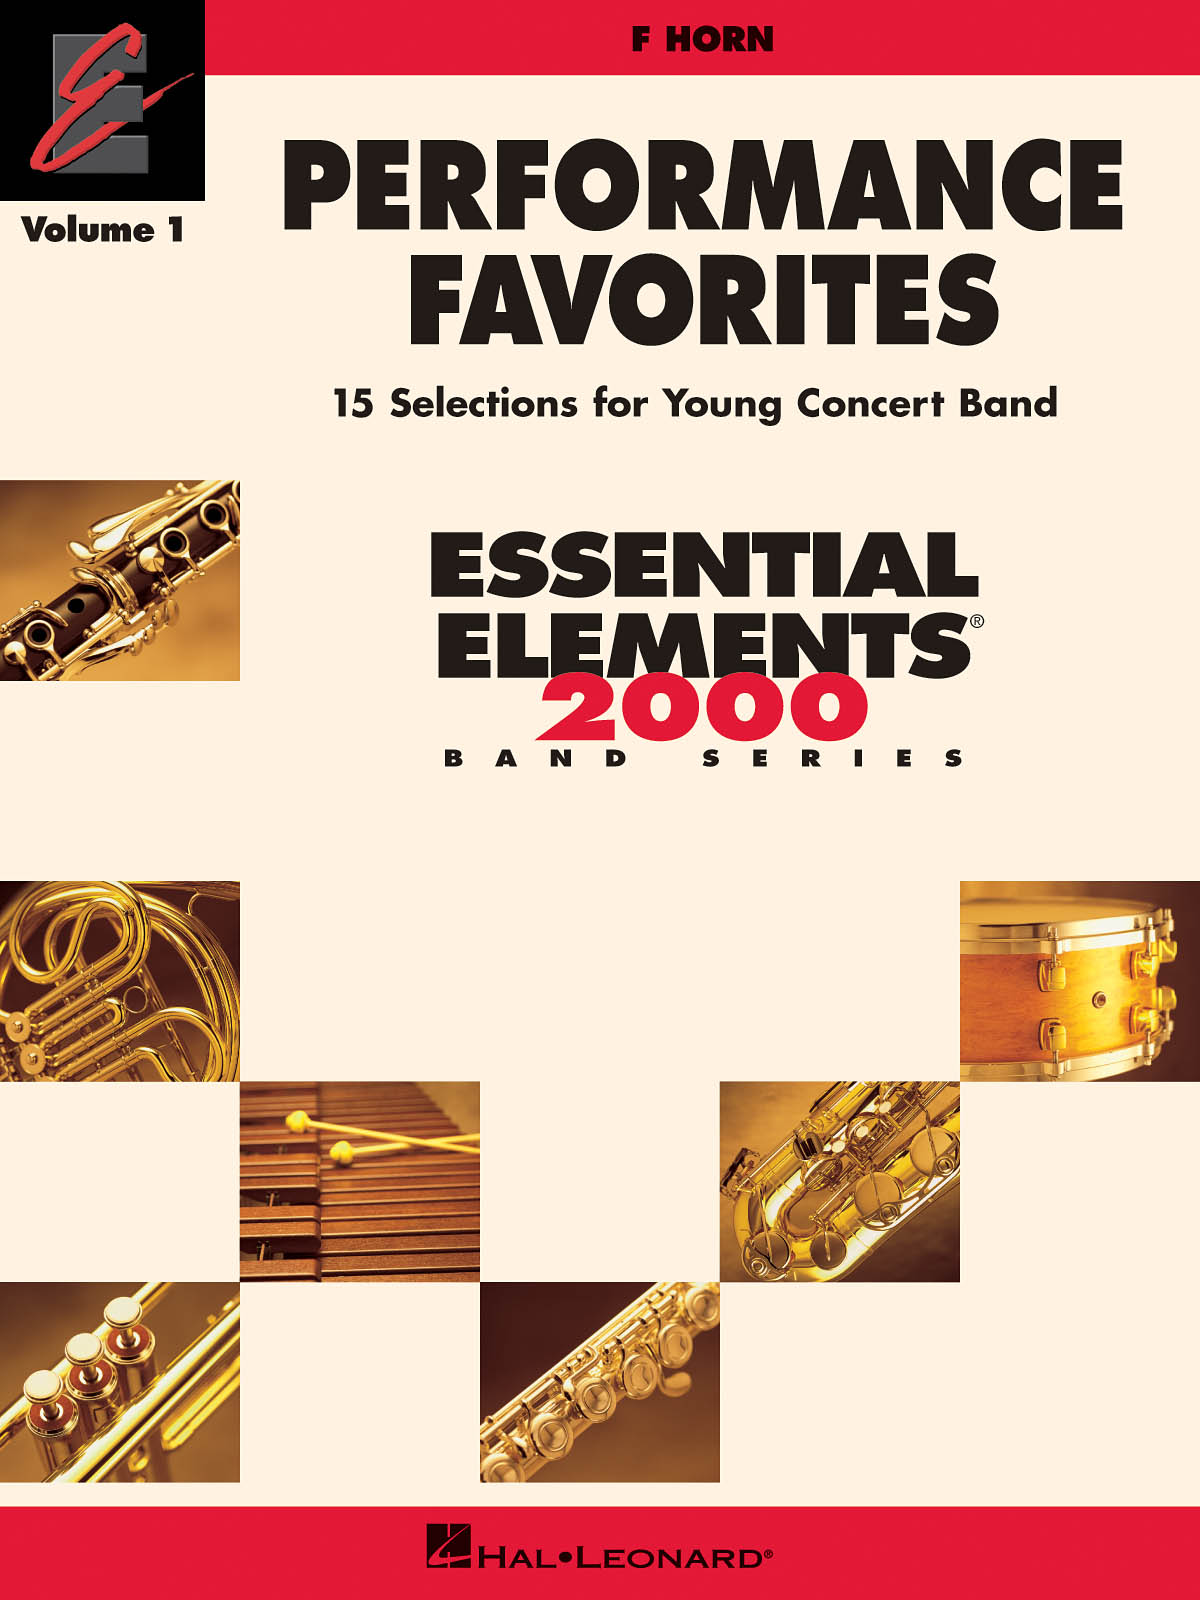 Performance Favorites Vol. 1 - F Horn - 15 Selections for Young Concert Band - noty na lesní roh